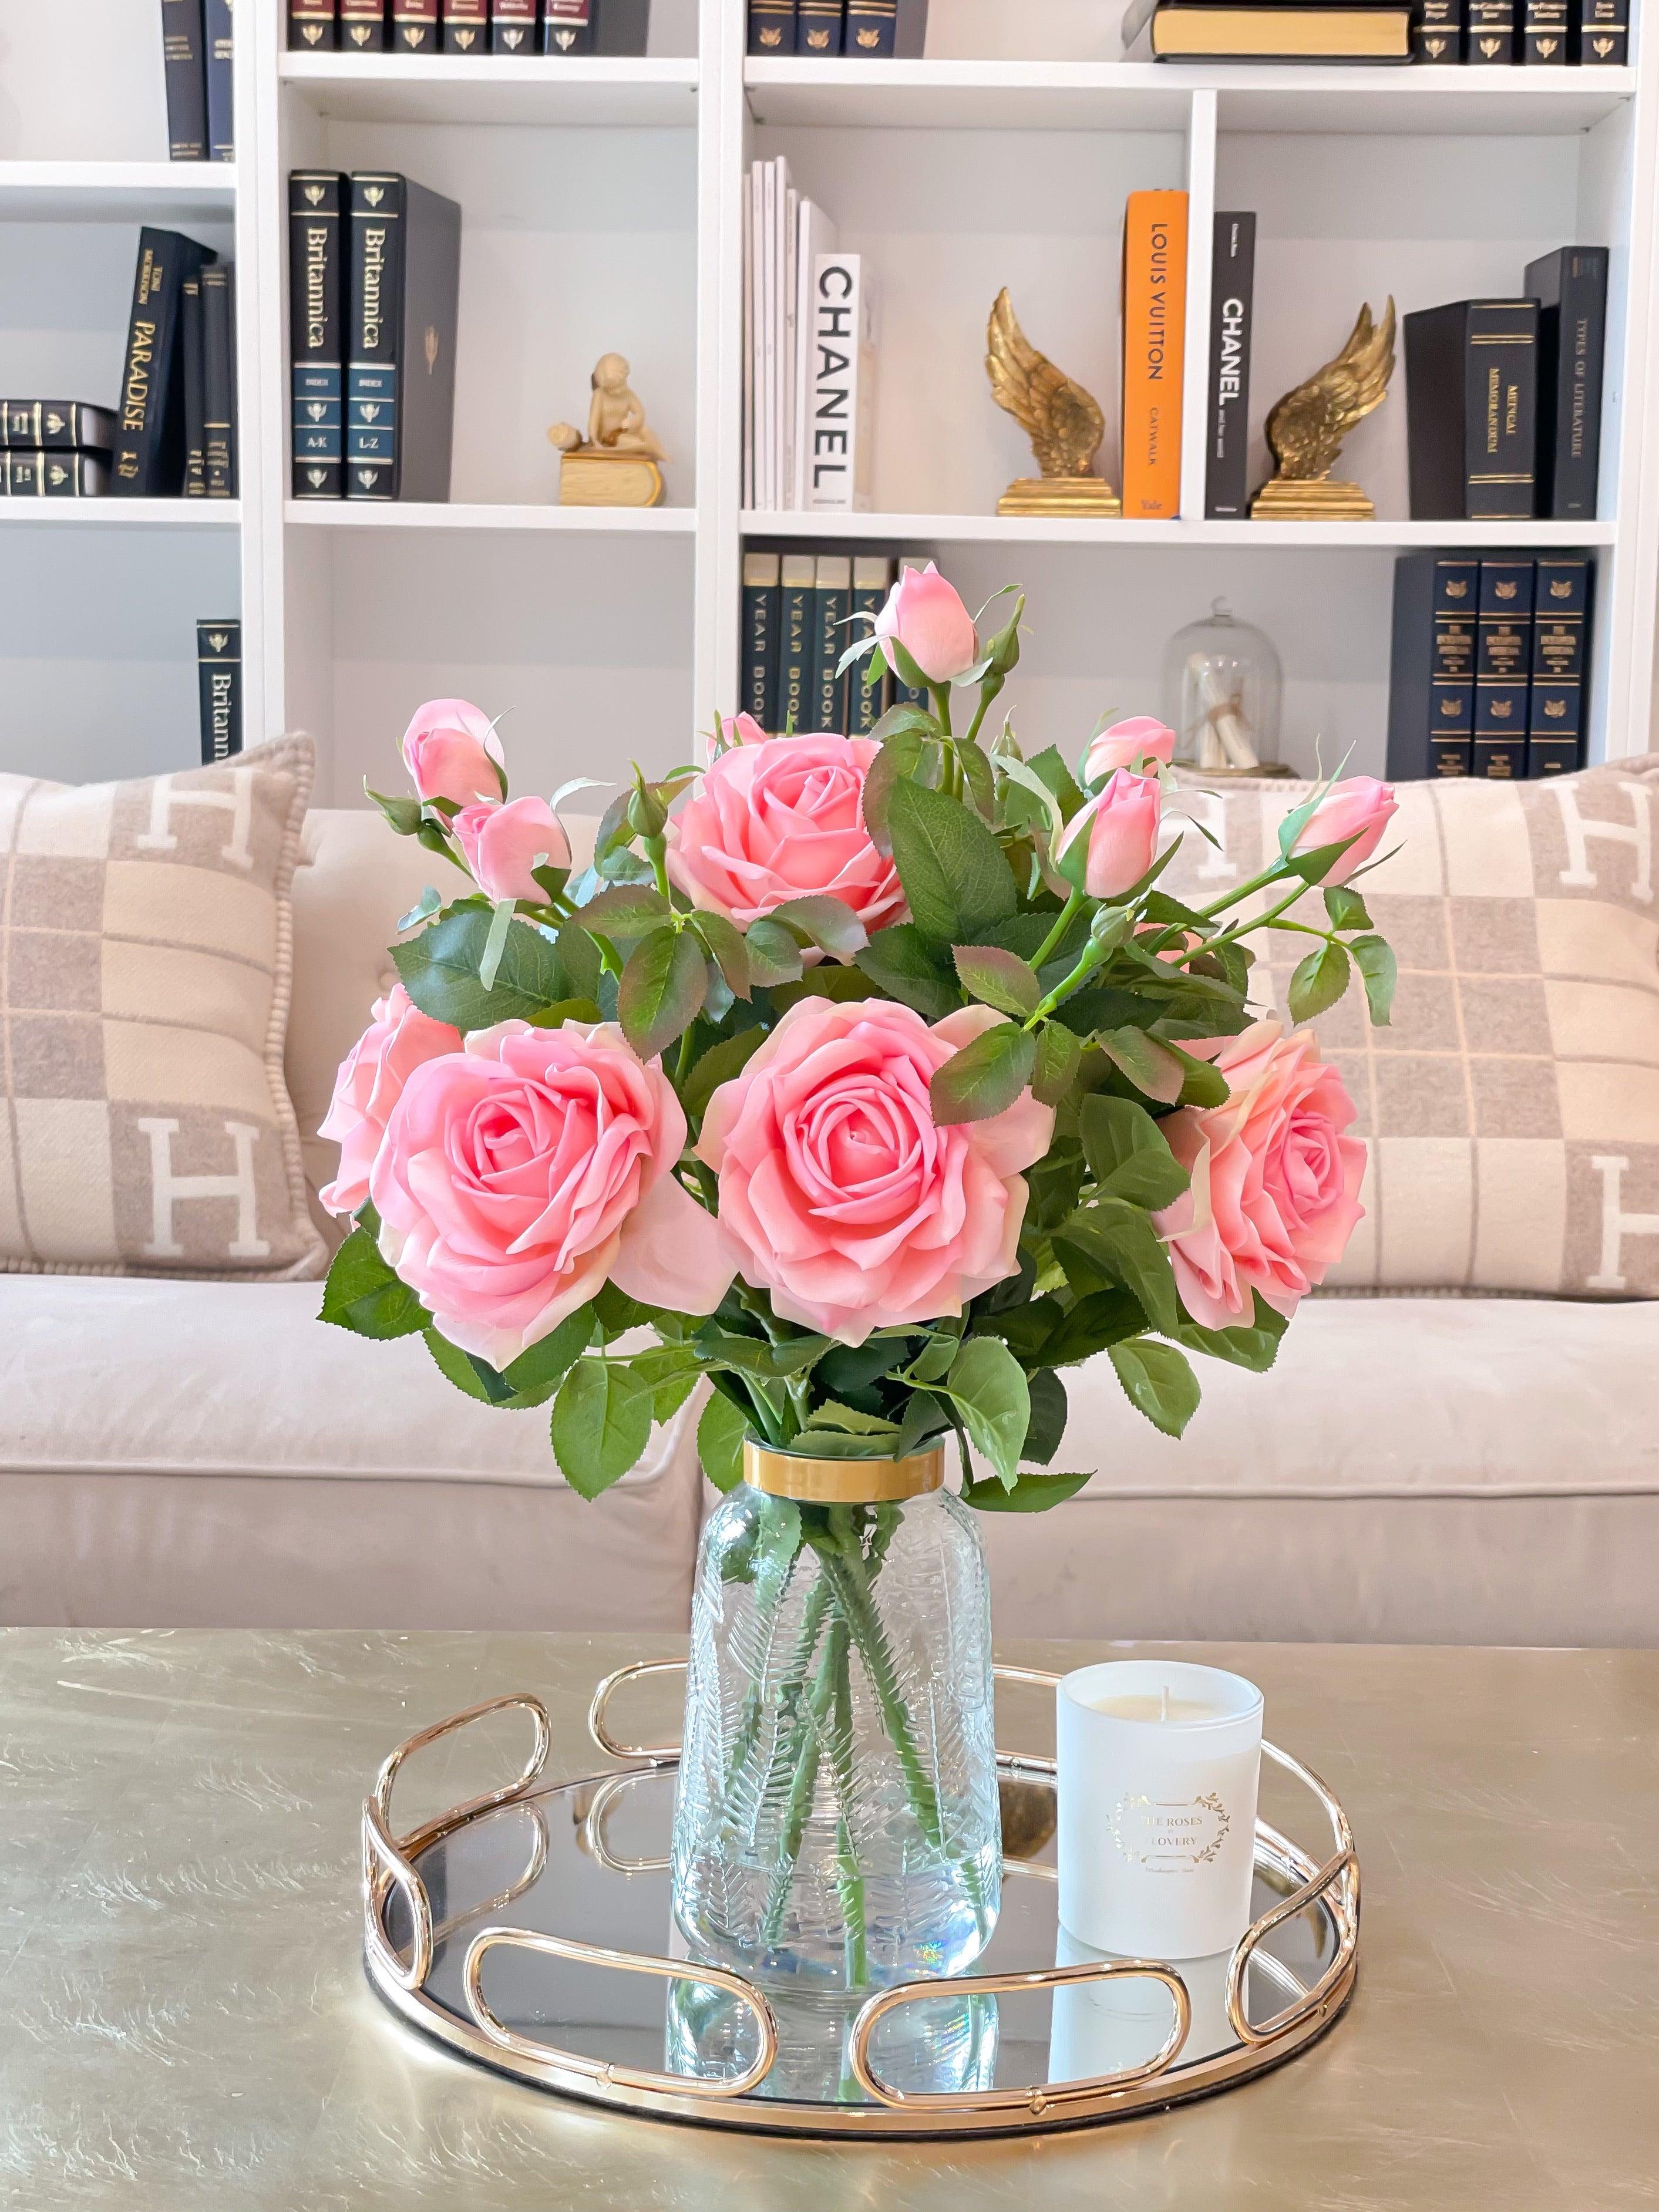 chanel book vase for flowers